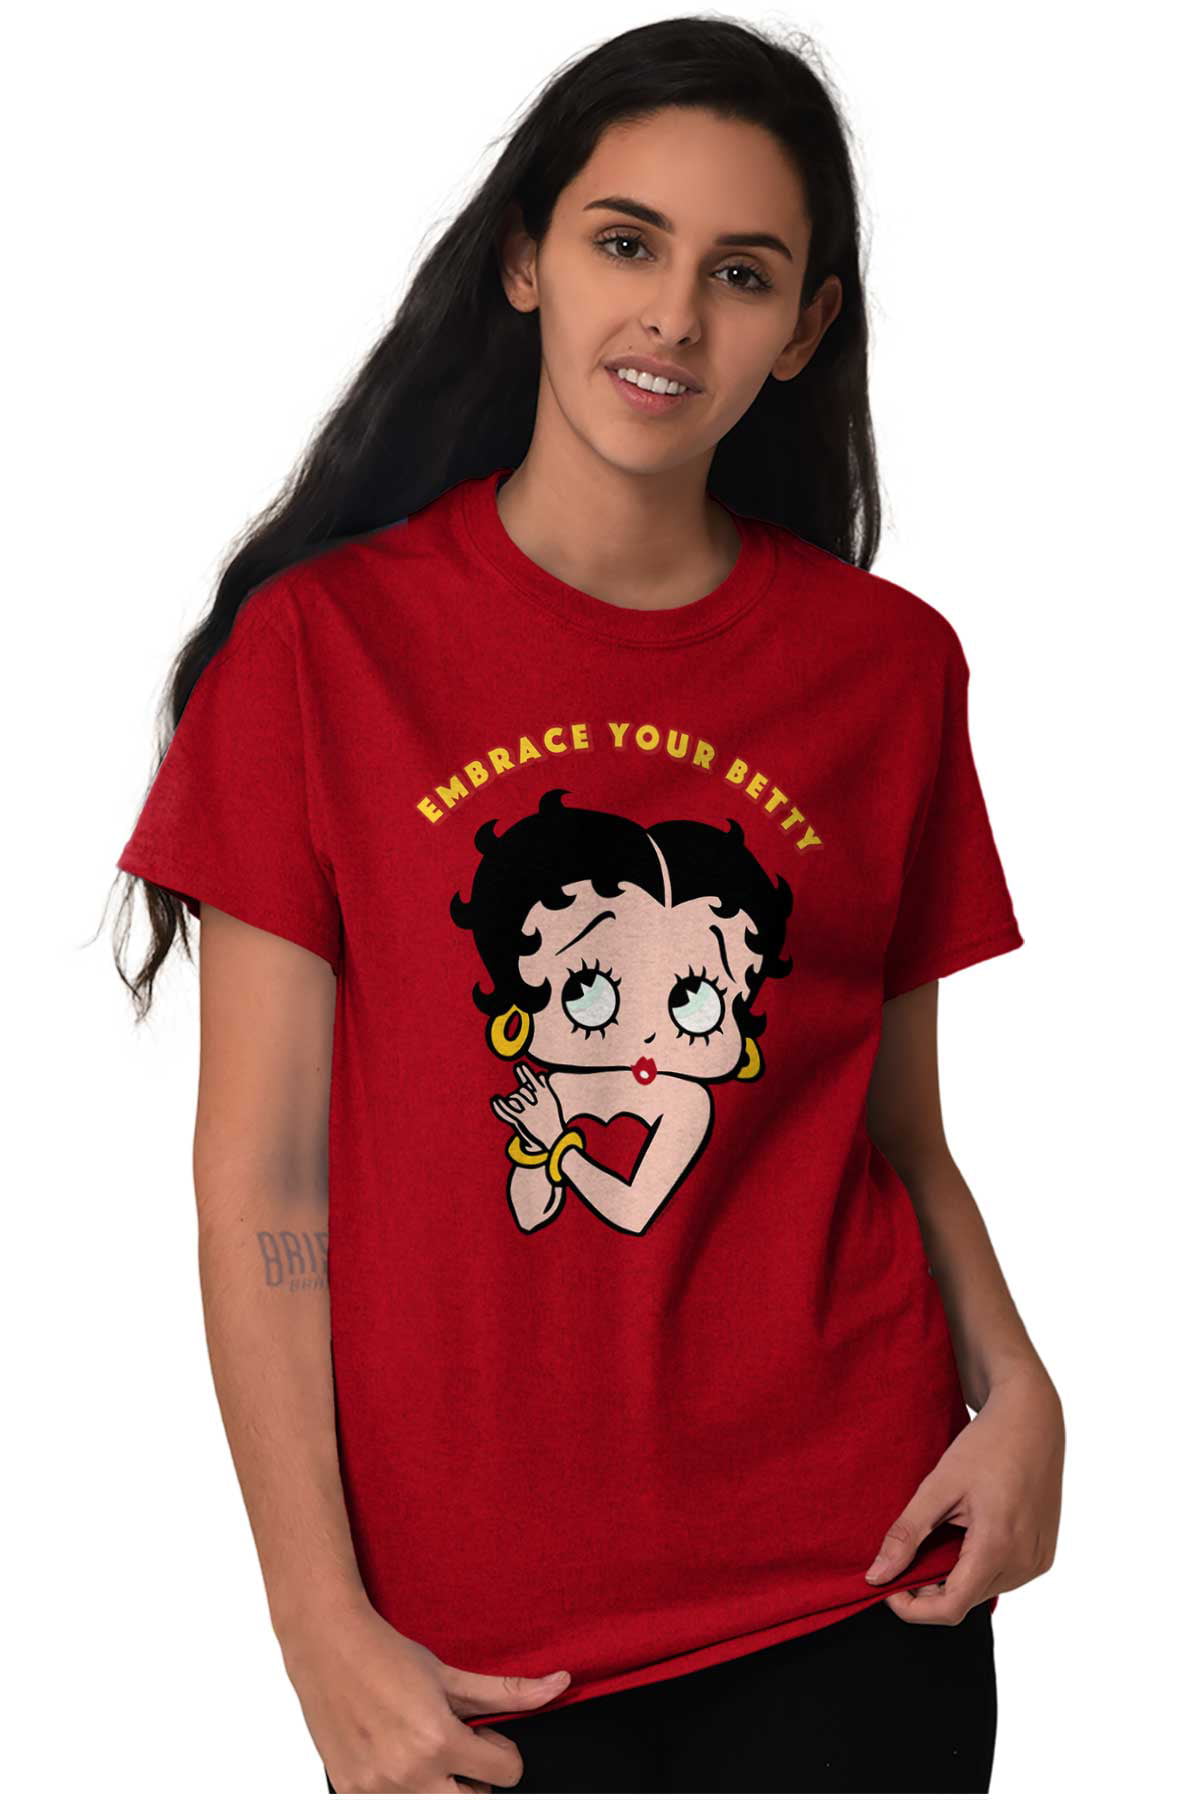 Betty Boop T Shirt Brand New Top Collectable Ladies Girls Size Small Long Sleeve 